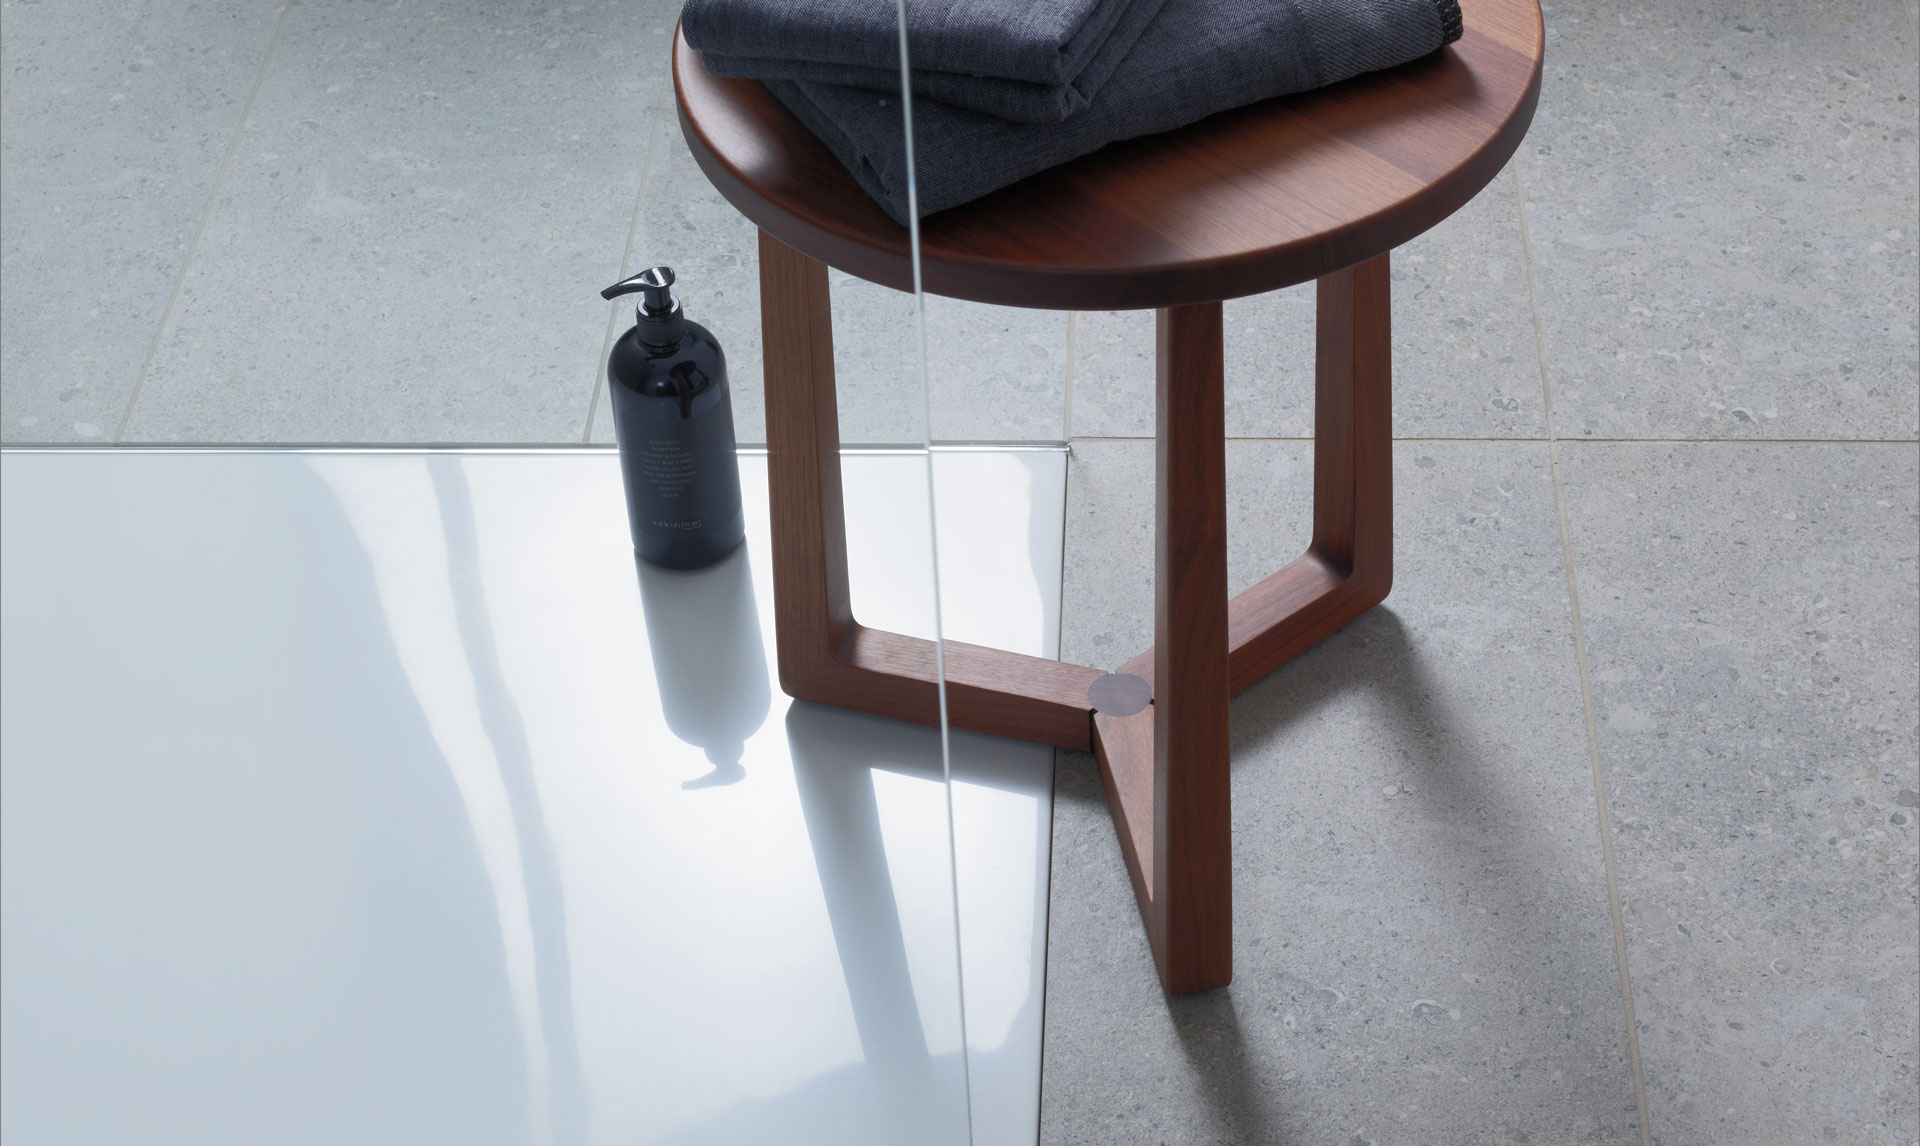 Stool stands on shower tray at floor-level
